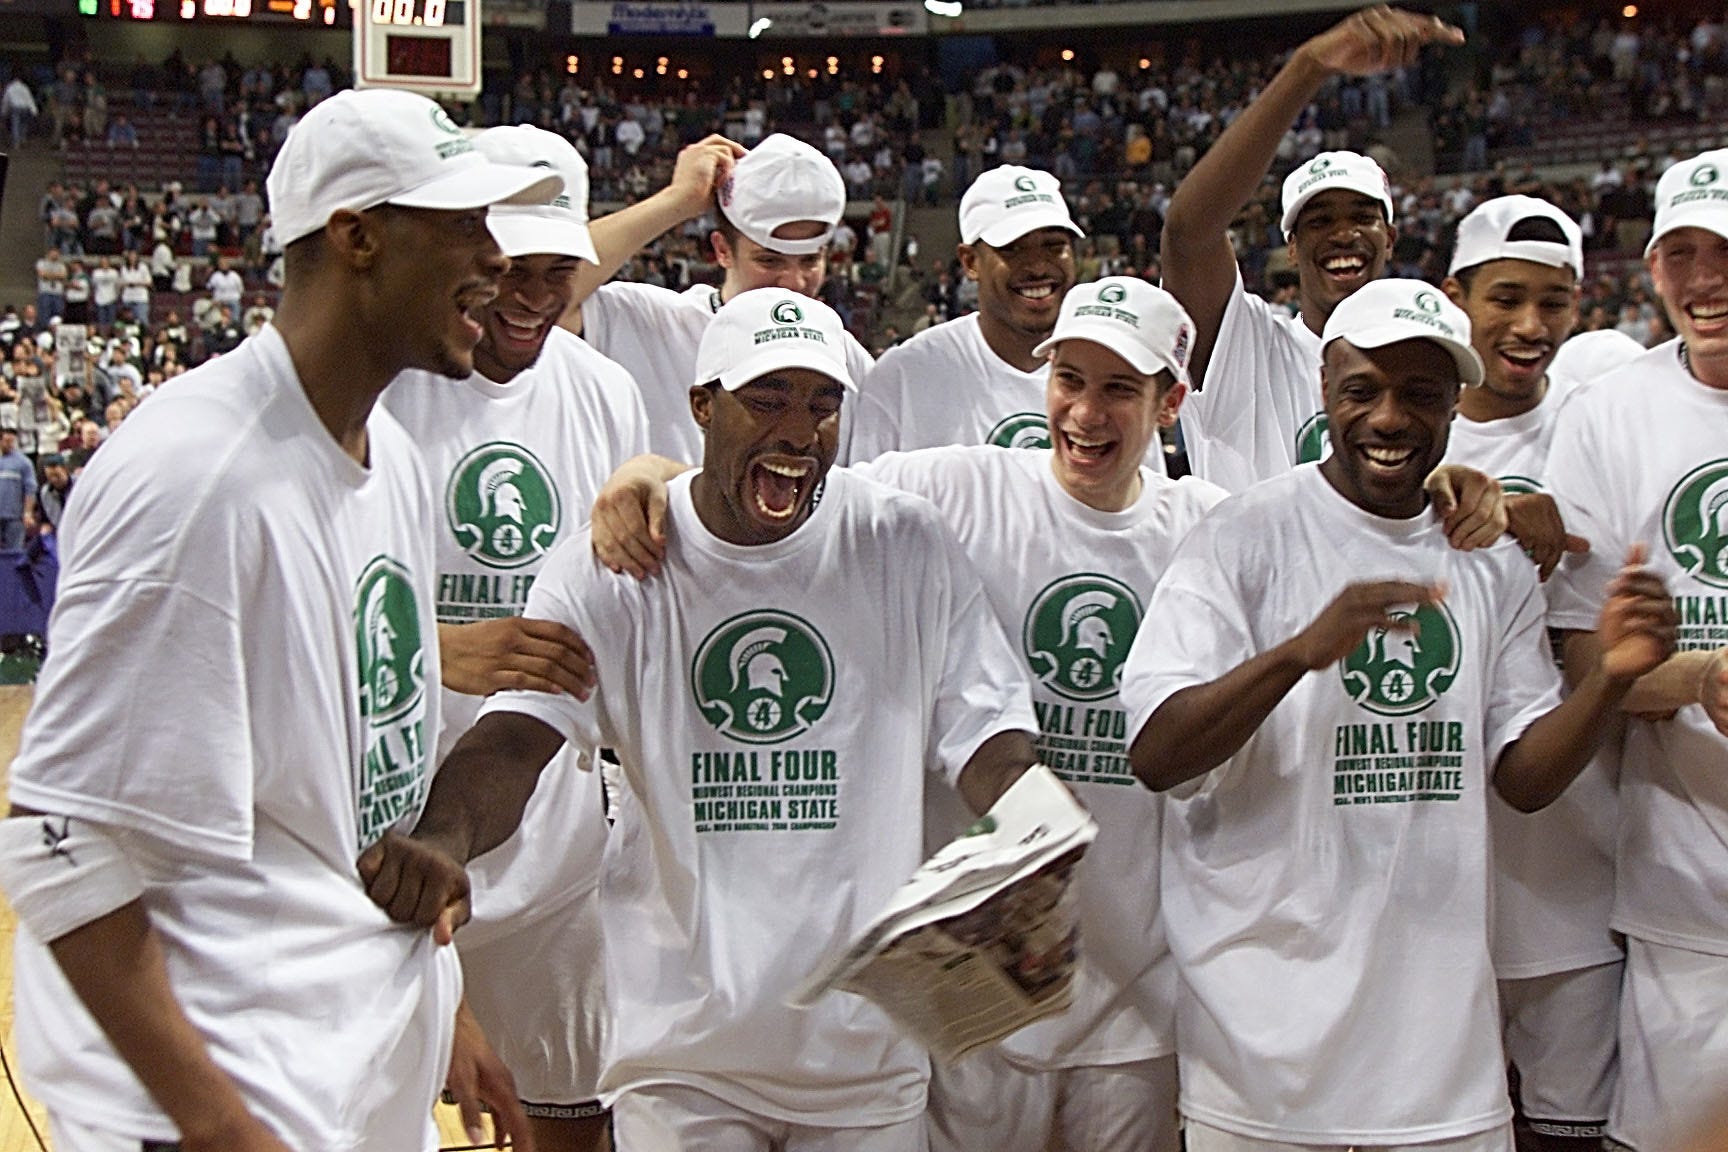 Michigan State ' s Mateen Cleaves celebrates with Morris Peterson, left, and teammates after defeating Iowa State, 75-64, in the Midwest Regional Final at The Palace of Auburn Hills. The Spartans advanced to the Final Four in Indianapolis with the win.